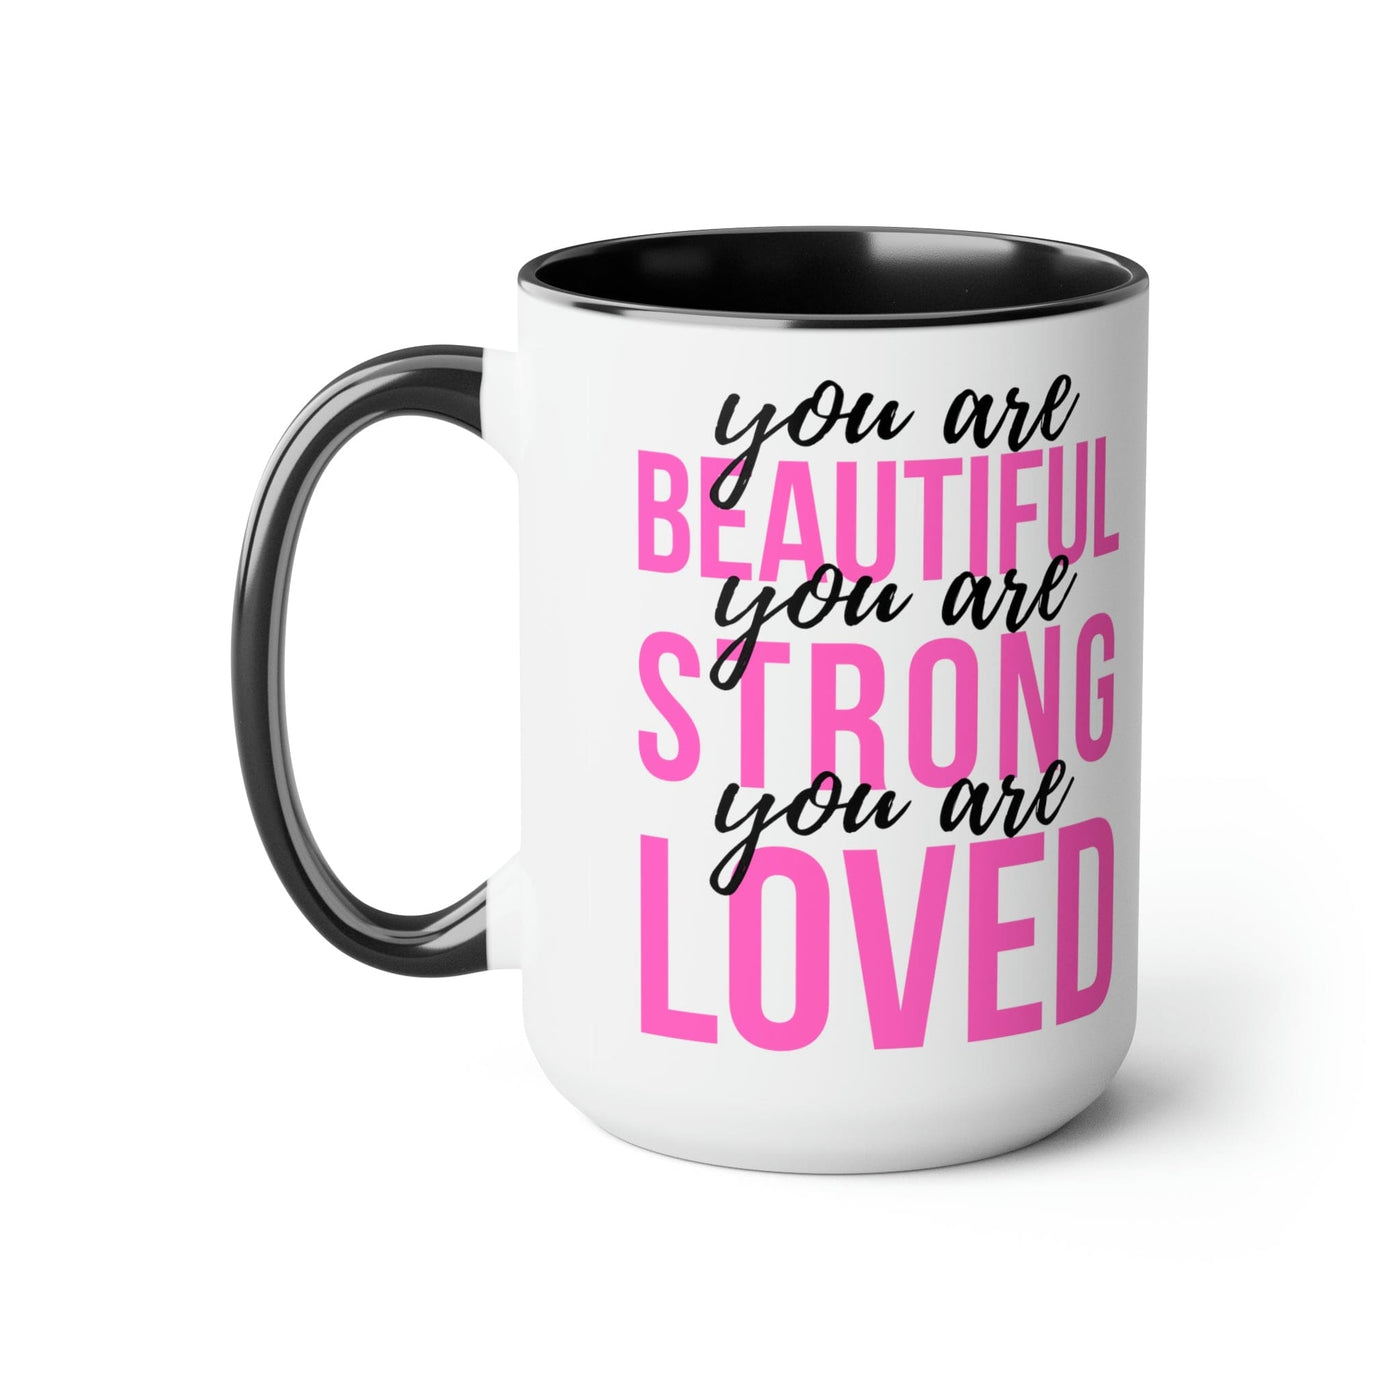 Two-tone Accent Ceramic Coffee Mug 15oz You Are Beautiful Strong Loved